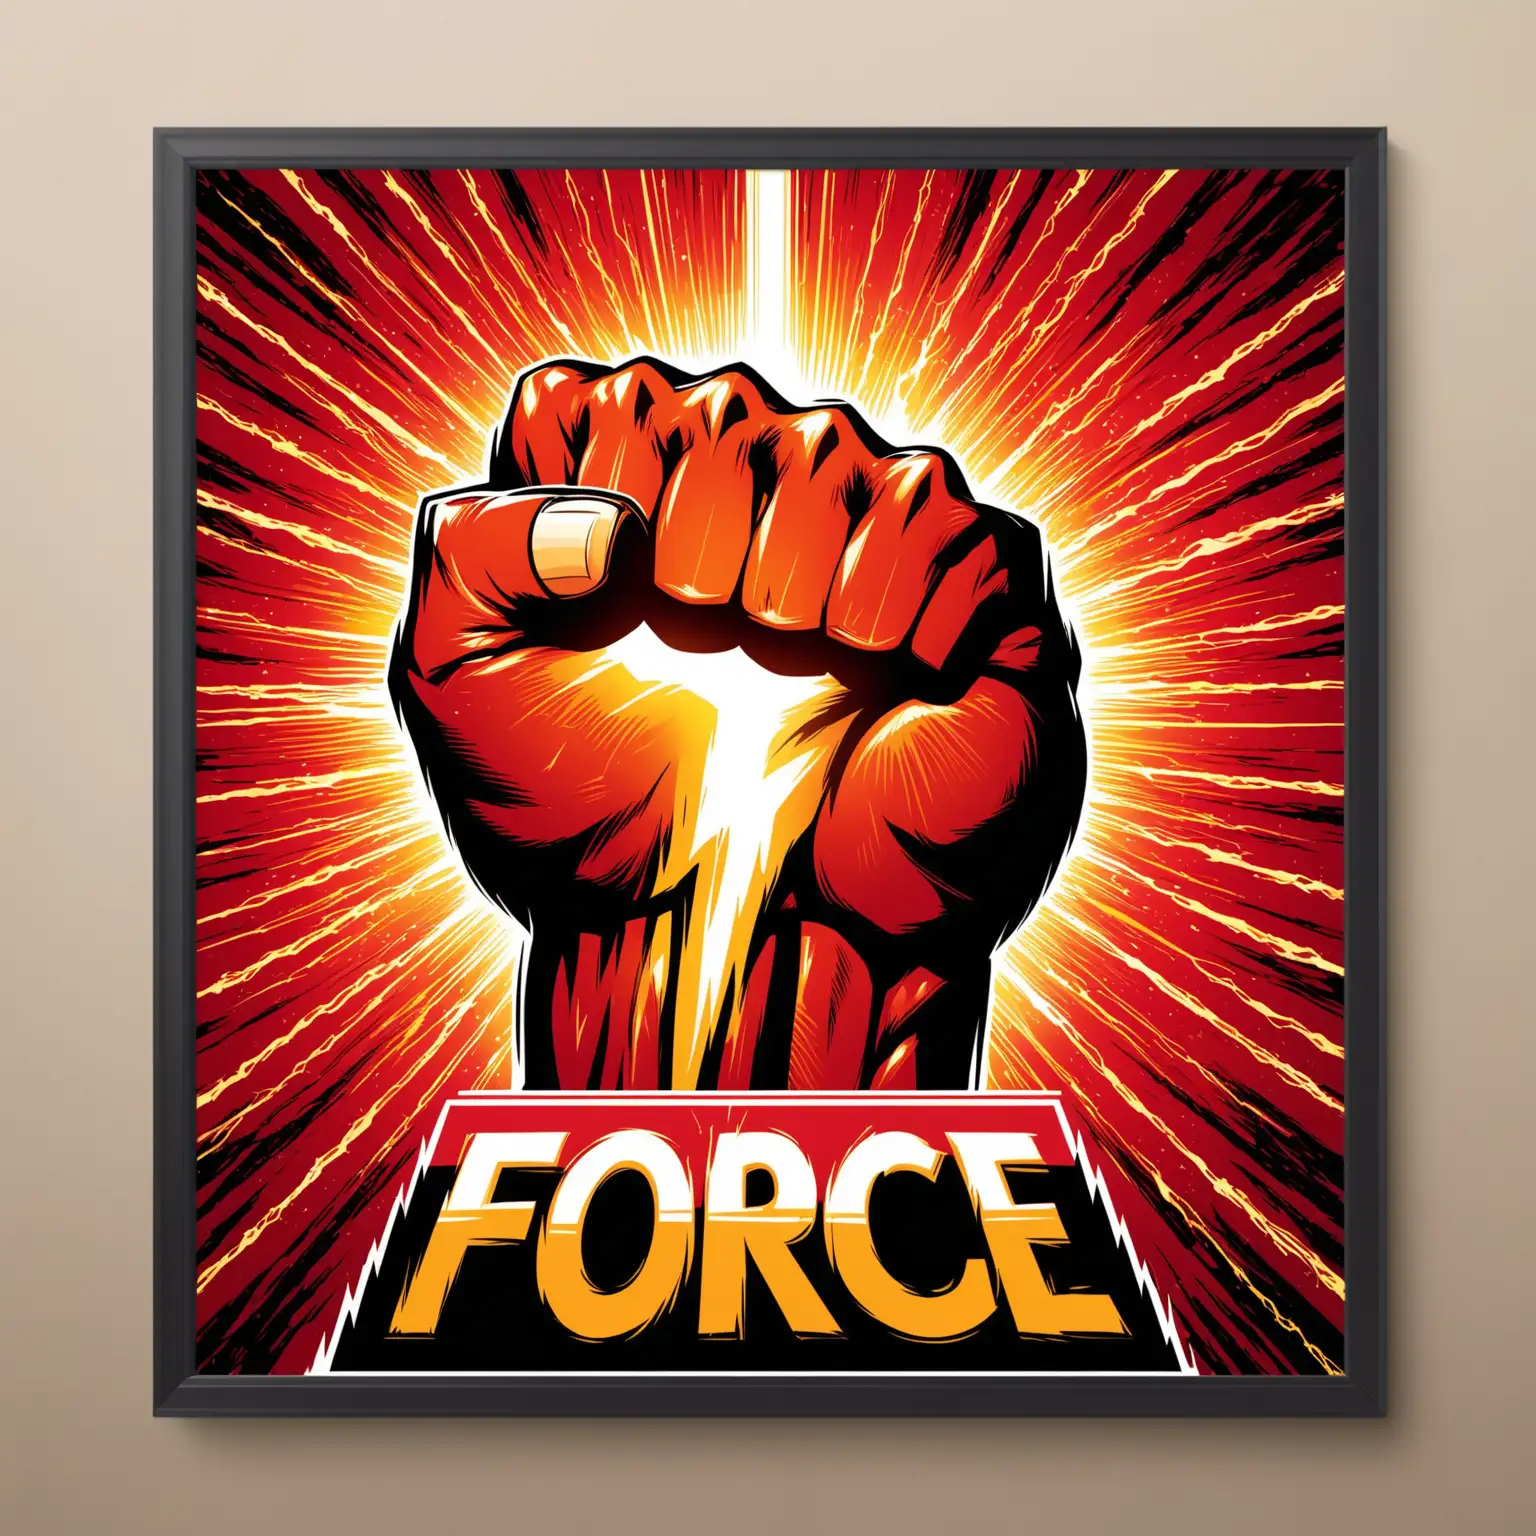 Force Logo with Clenched Fist and Lightning Bolt Design